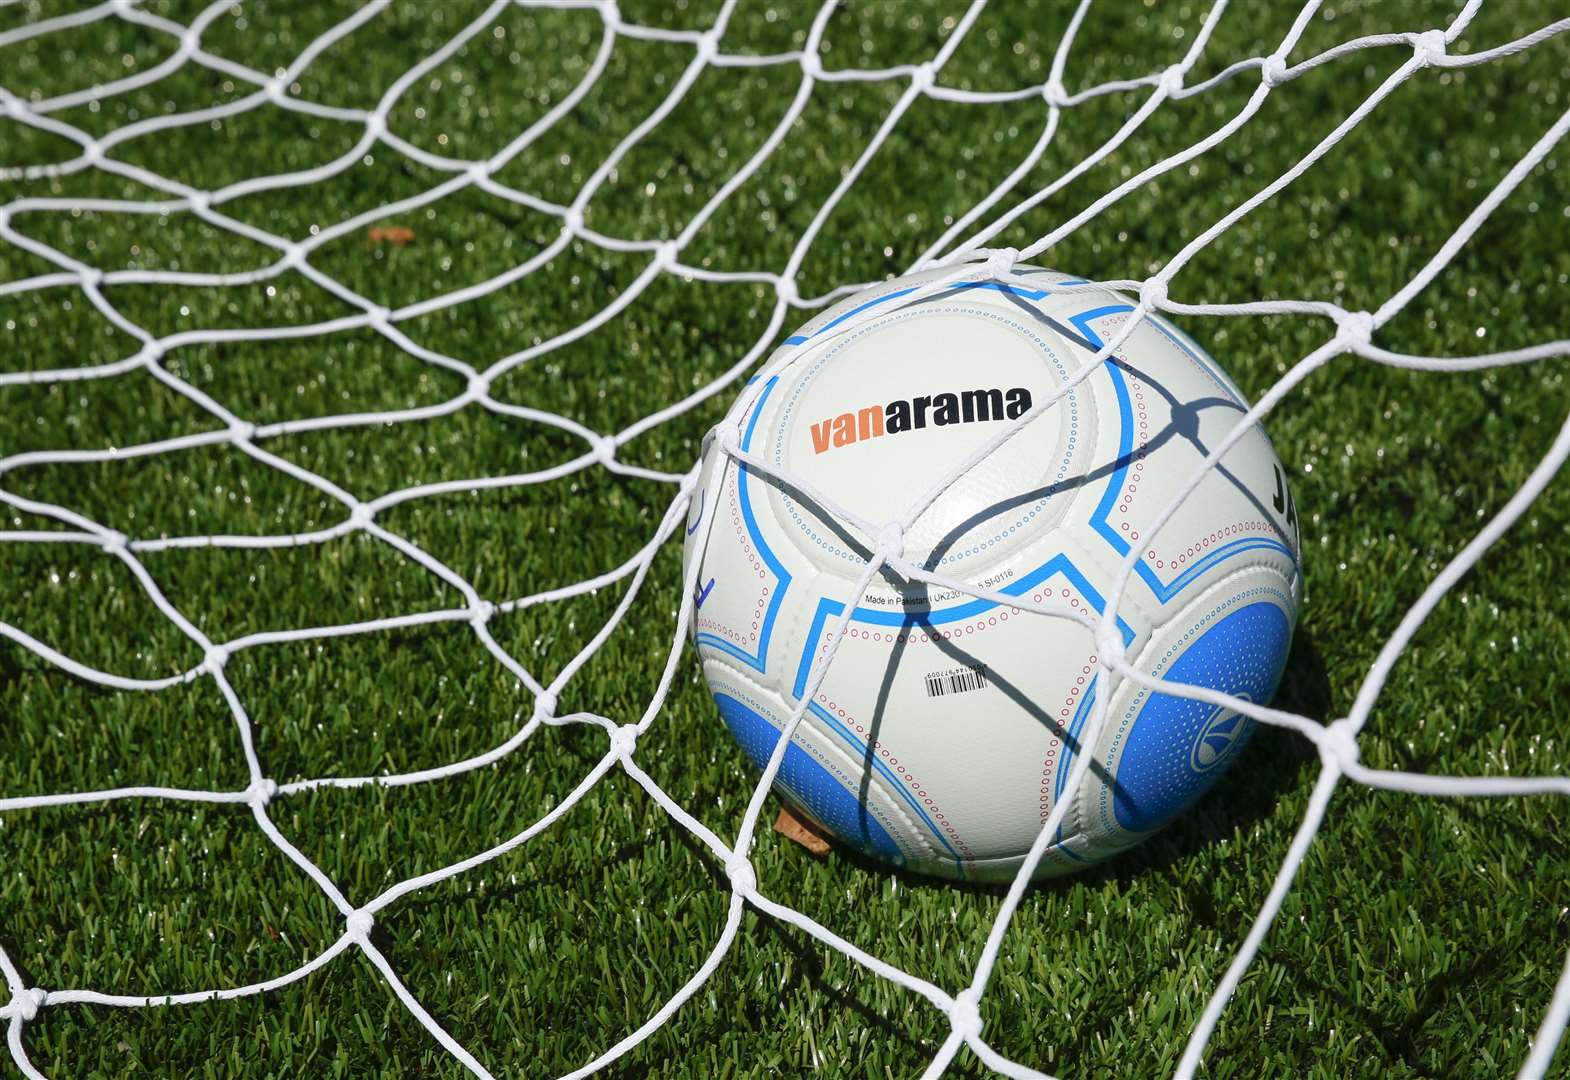 Football fixtures and results - Saturday September 8 to Wednesday